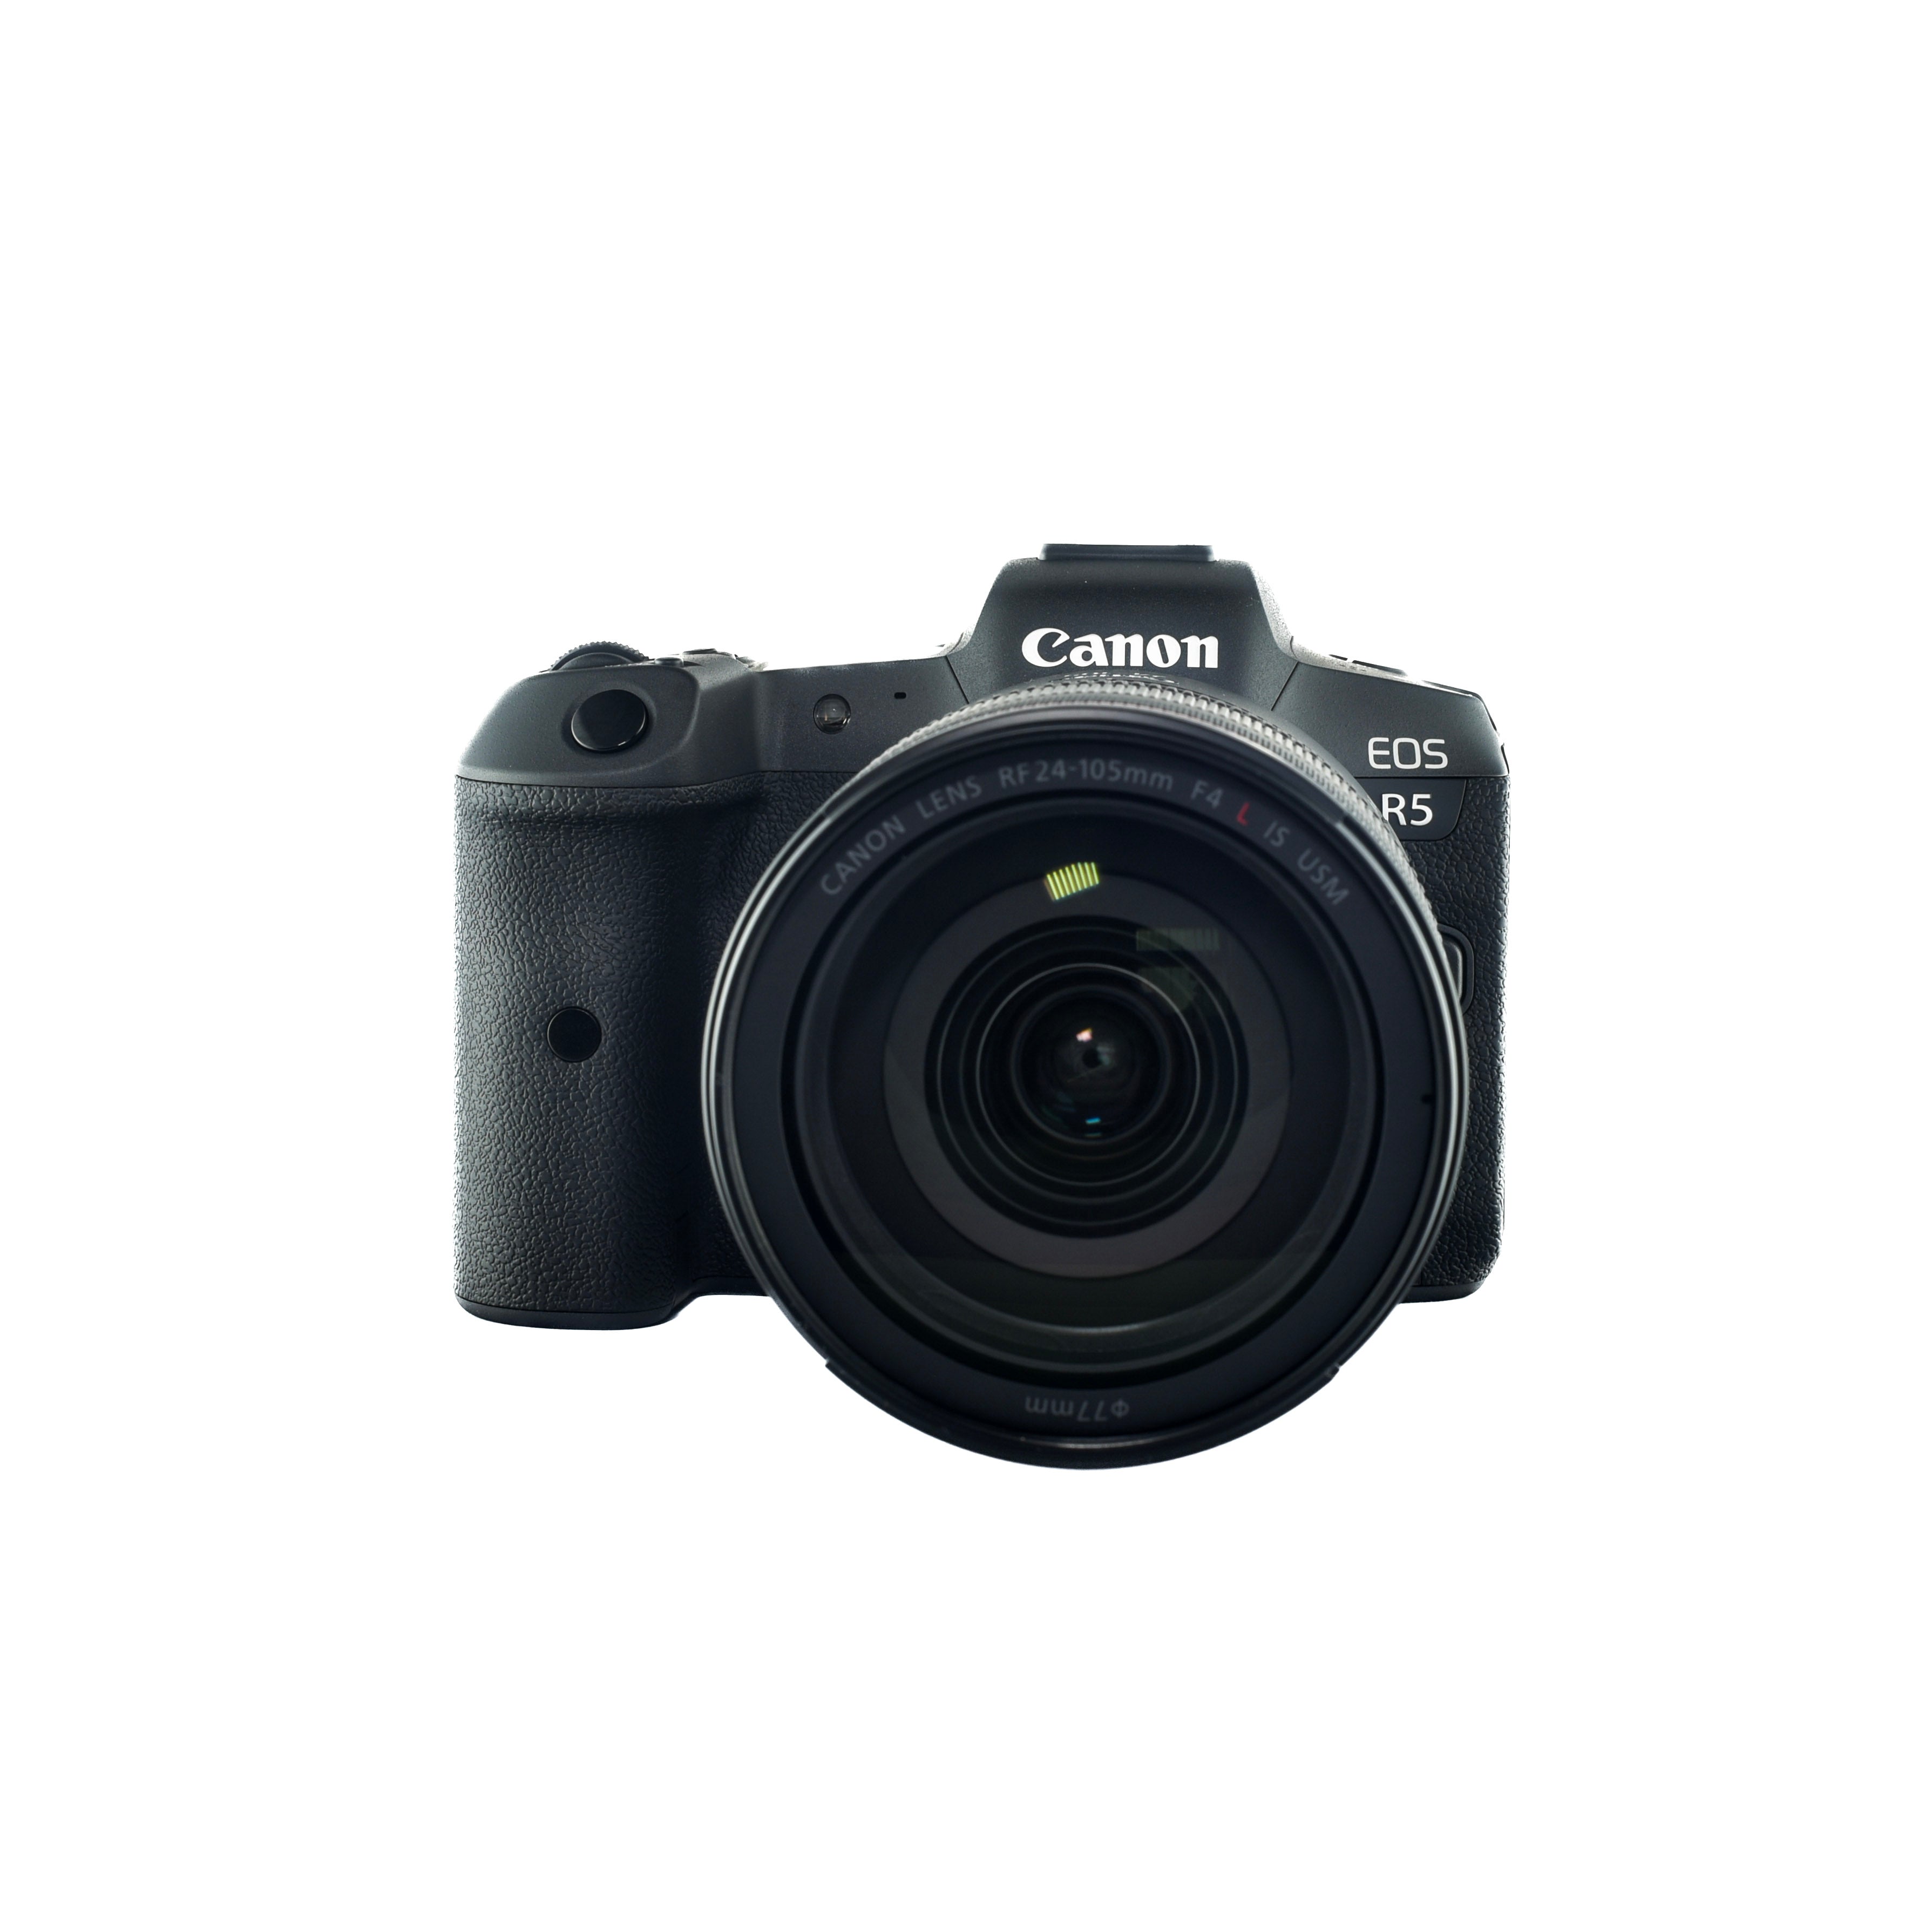  Canon EOS R5 Mirrorless Digital Camera with 24-105mm f/4L Lens  : Electronics